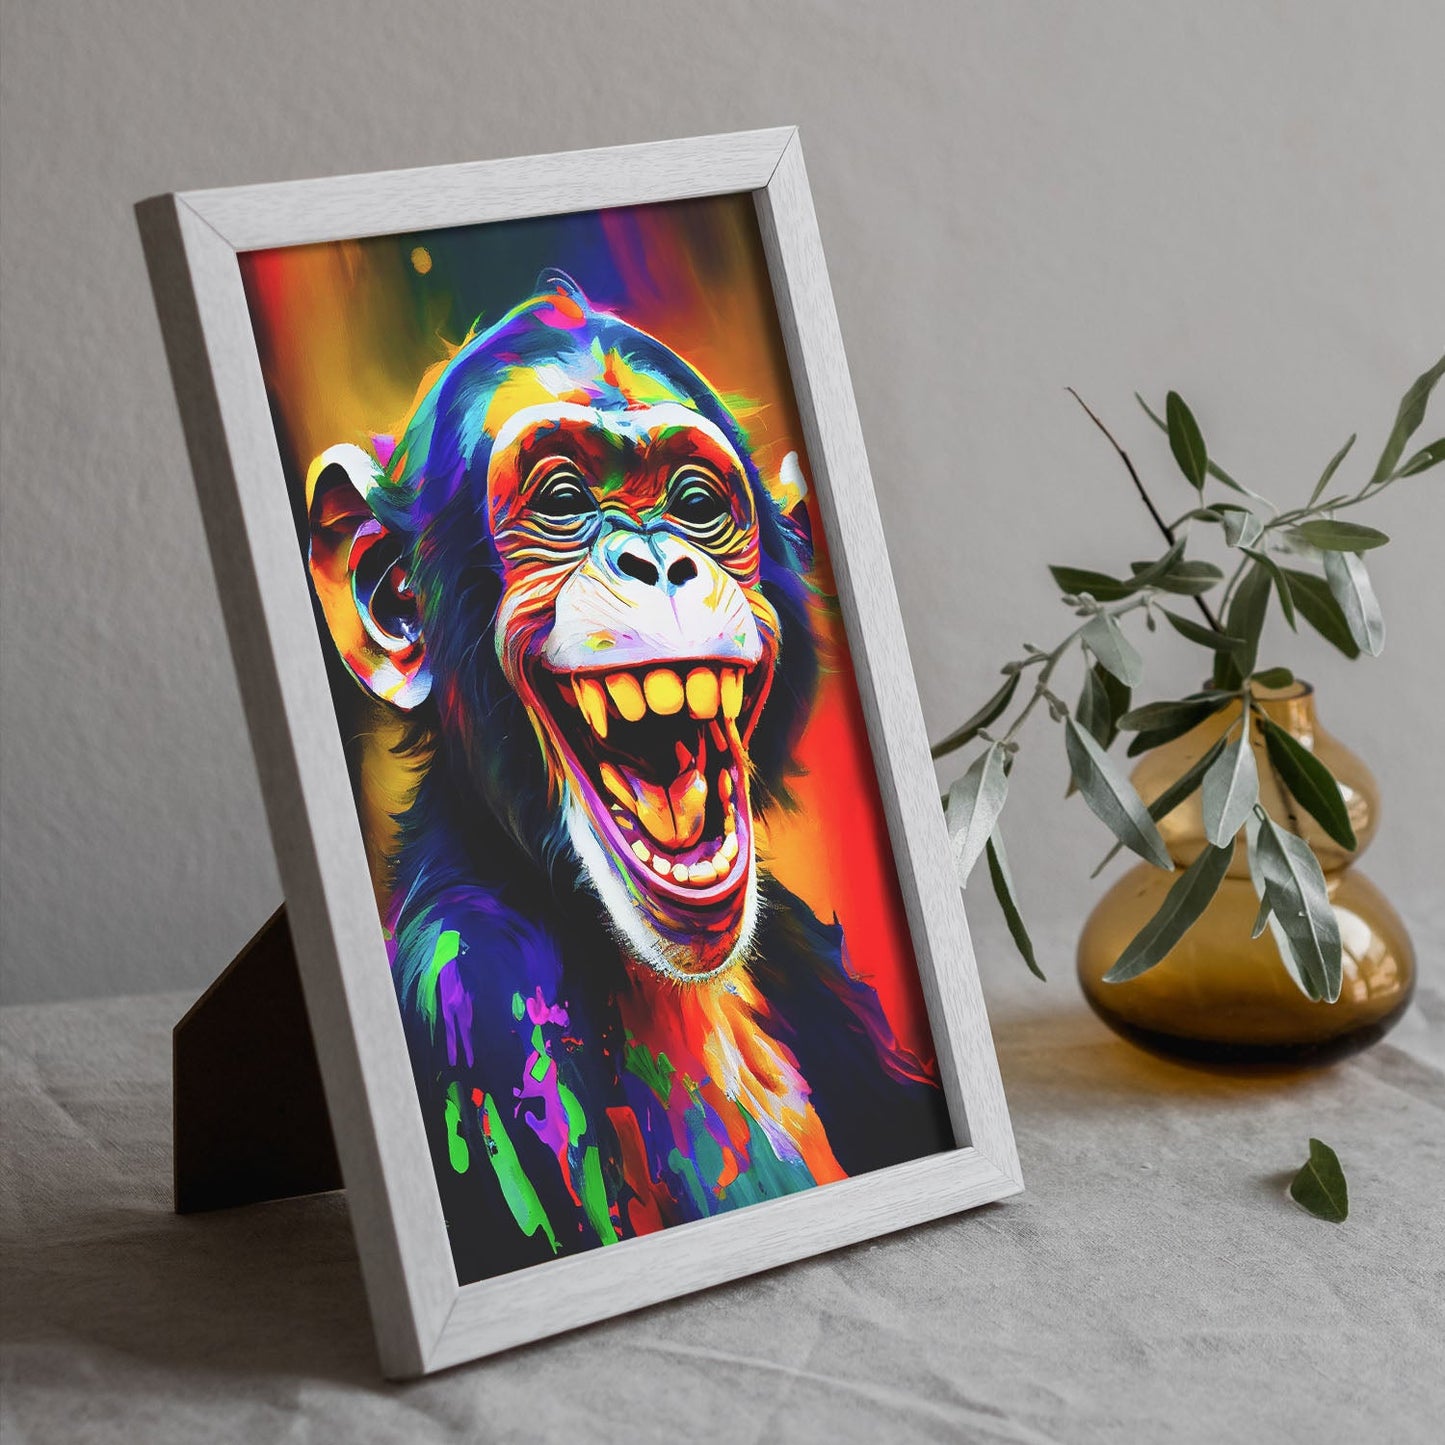 Nacnic Abstract smiling Monkey in Lisa Fran Style. Aesthetic Wall Art Prints for Bedroom or Living Room Design.